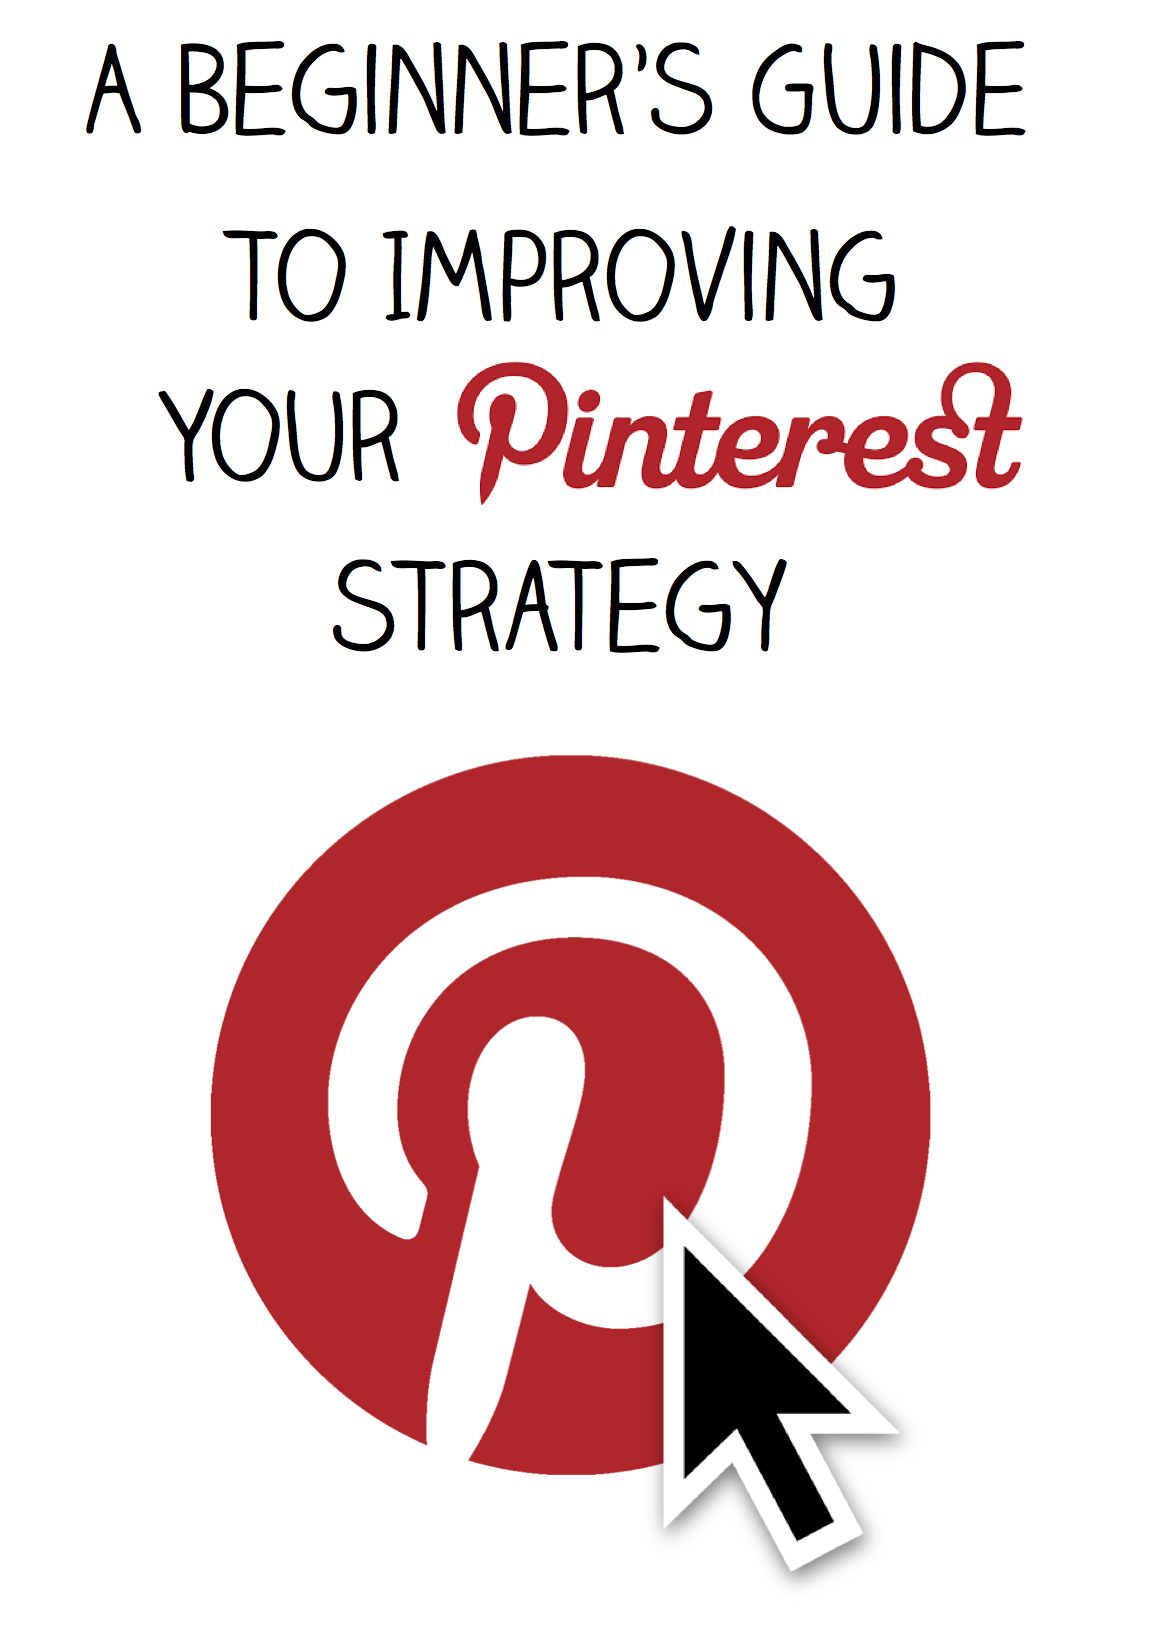 How I grew my Pinterest account from 100 to 21,000 followers in less than a year! The 5 simple steps to improve your Pinterest strategy as a beginner.